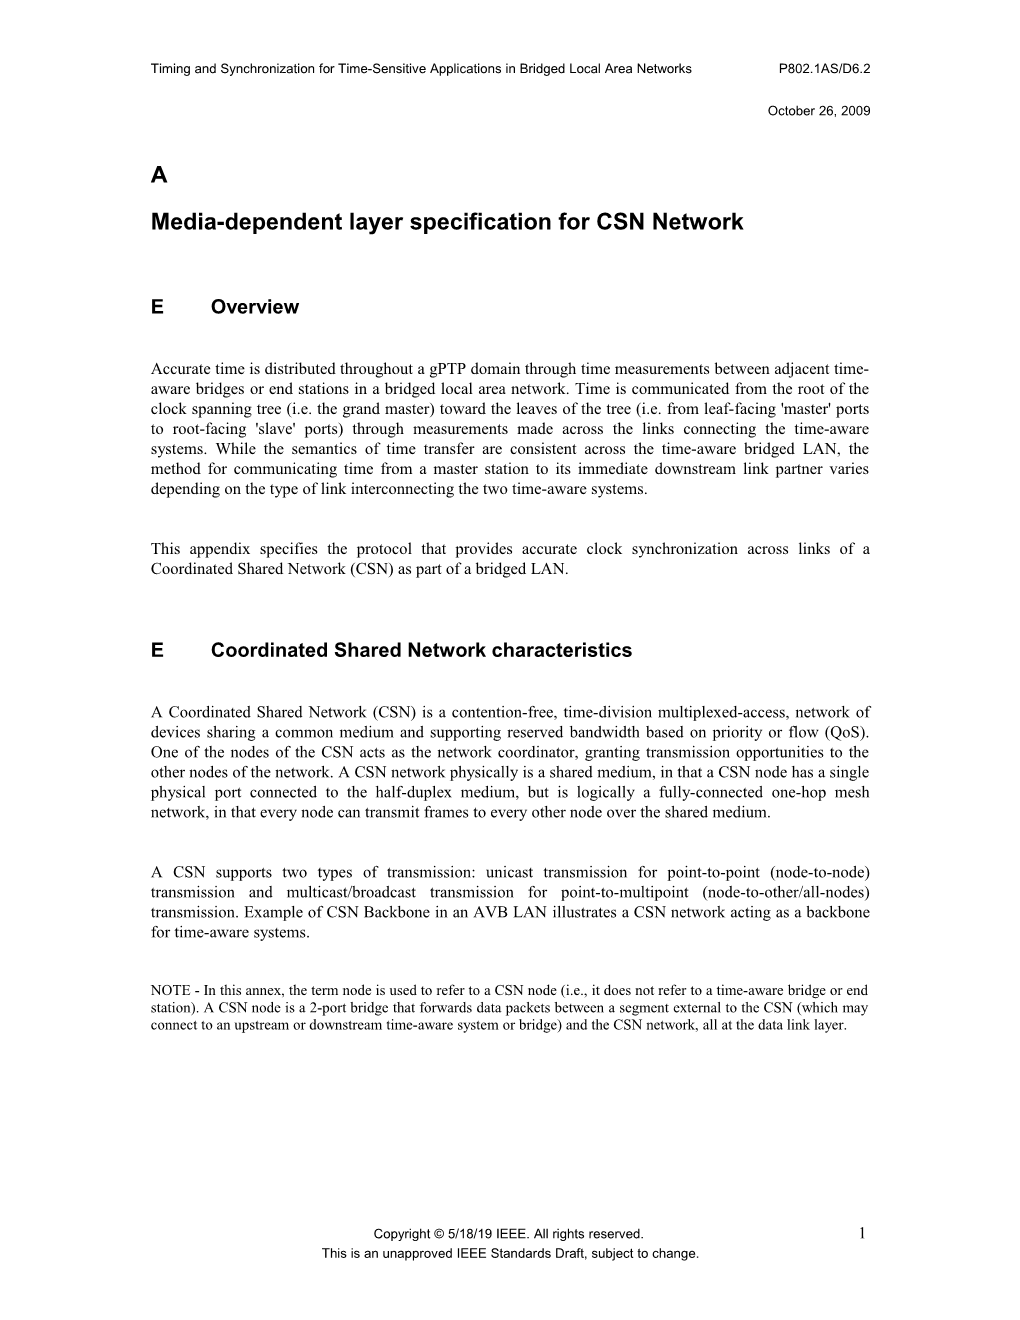 Media-Dependent Layer Specification for CSN Network